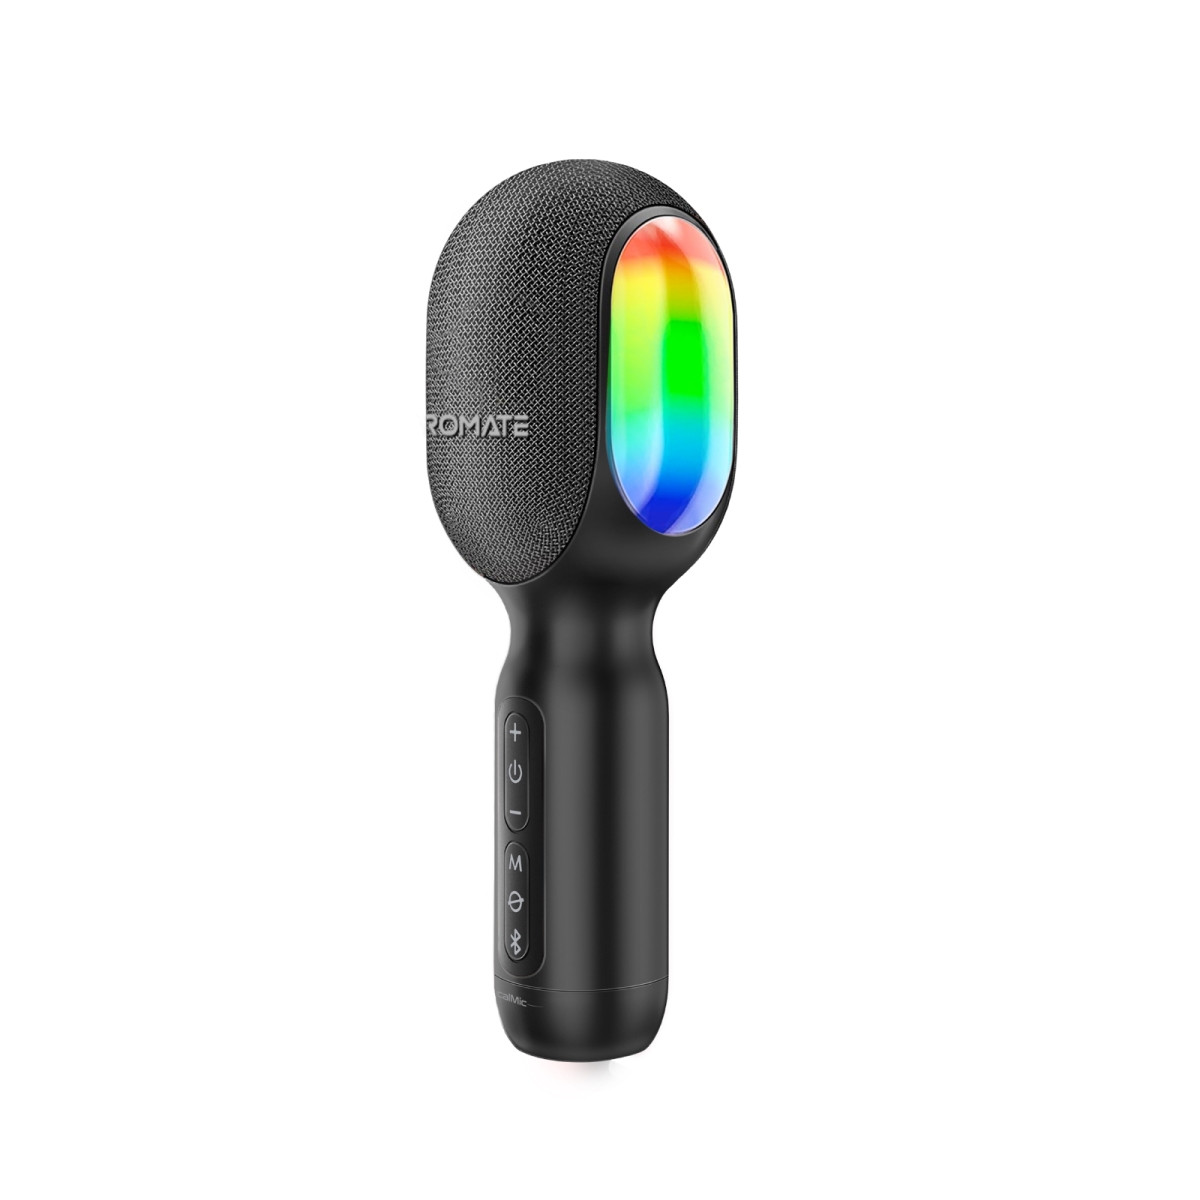 Promate Wireless Bluetooth Karaoke Microphone, Handheld 5-in-1 Karaoke Microphone & Speaker with LED Lights, TWS Duet Mode, 10-Hour Play Time, 3.5mm AUX and Headphone Port for Party, Kids, Adults, VocalMic